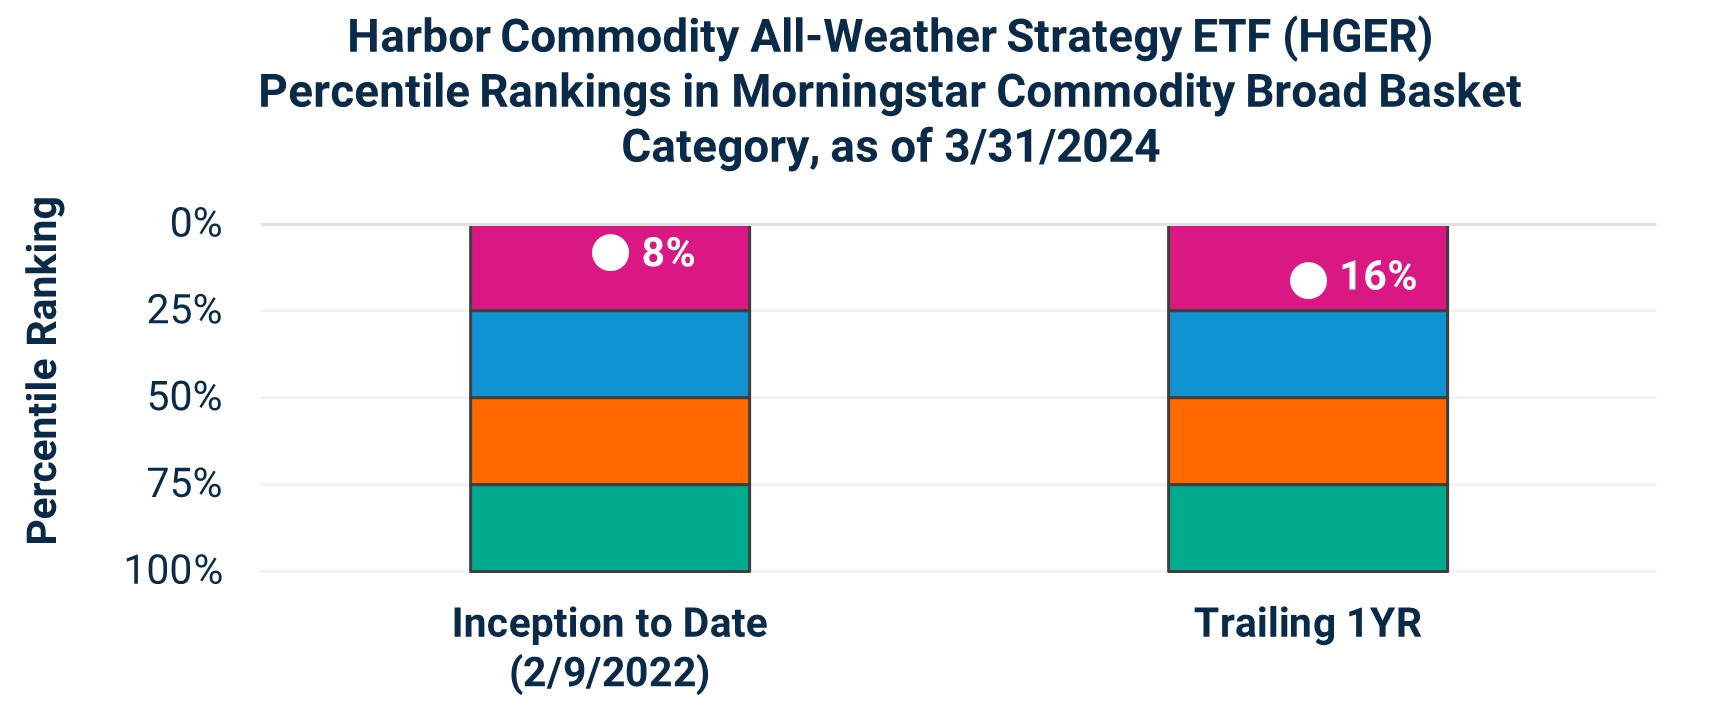 Harbor Commodity All-Weather Strategy ETF (HGER)
Percentile Rankings in Morningstar Commodity Broad Basket Category, as of 3/31/2024